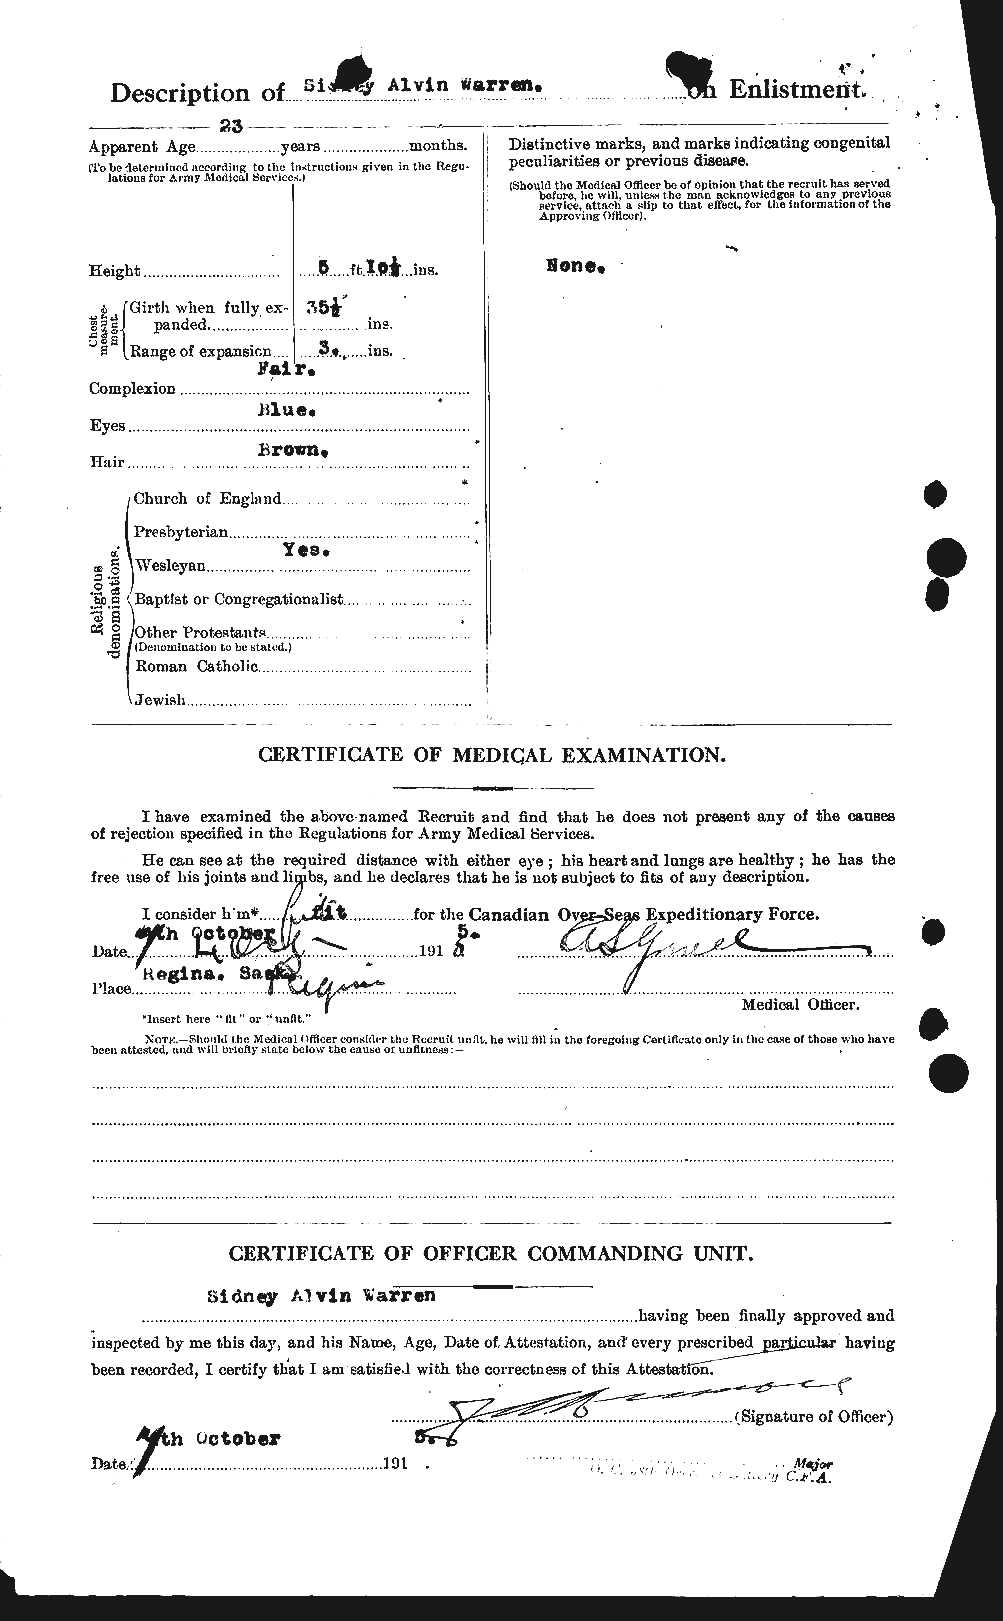 Personnel Records of the First World War - CEF 658637b